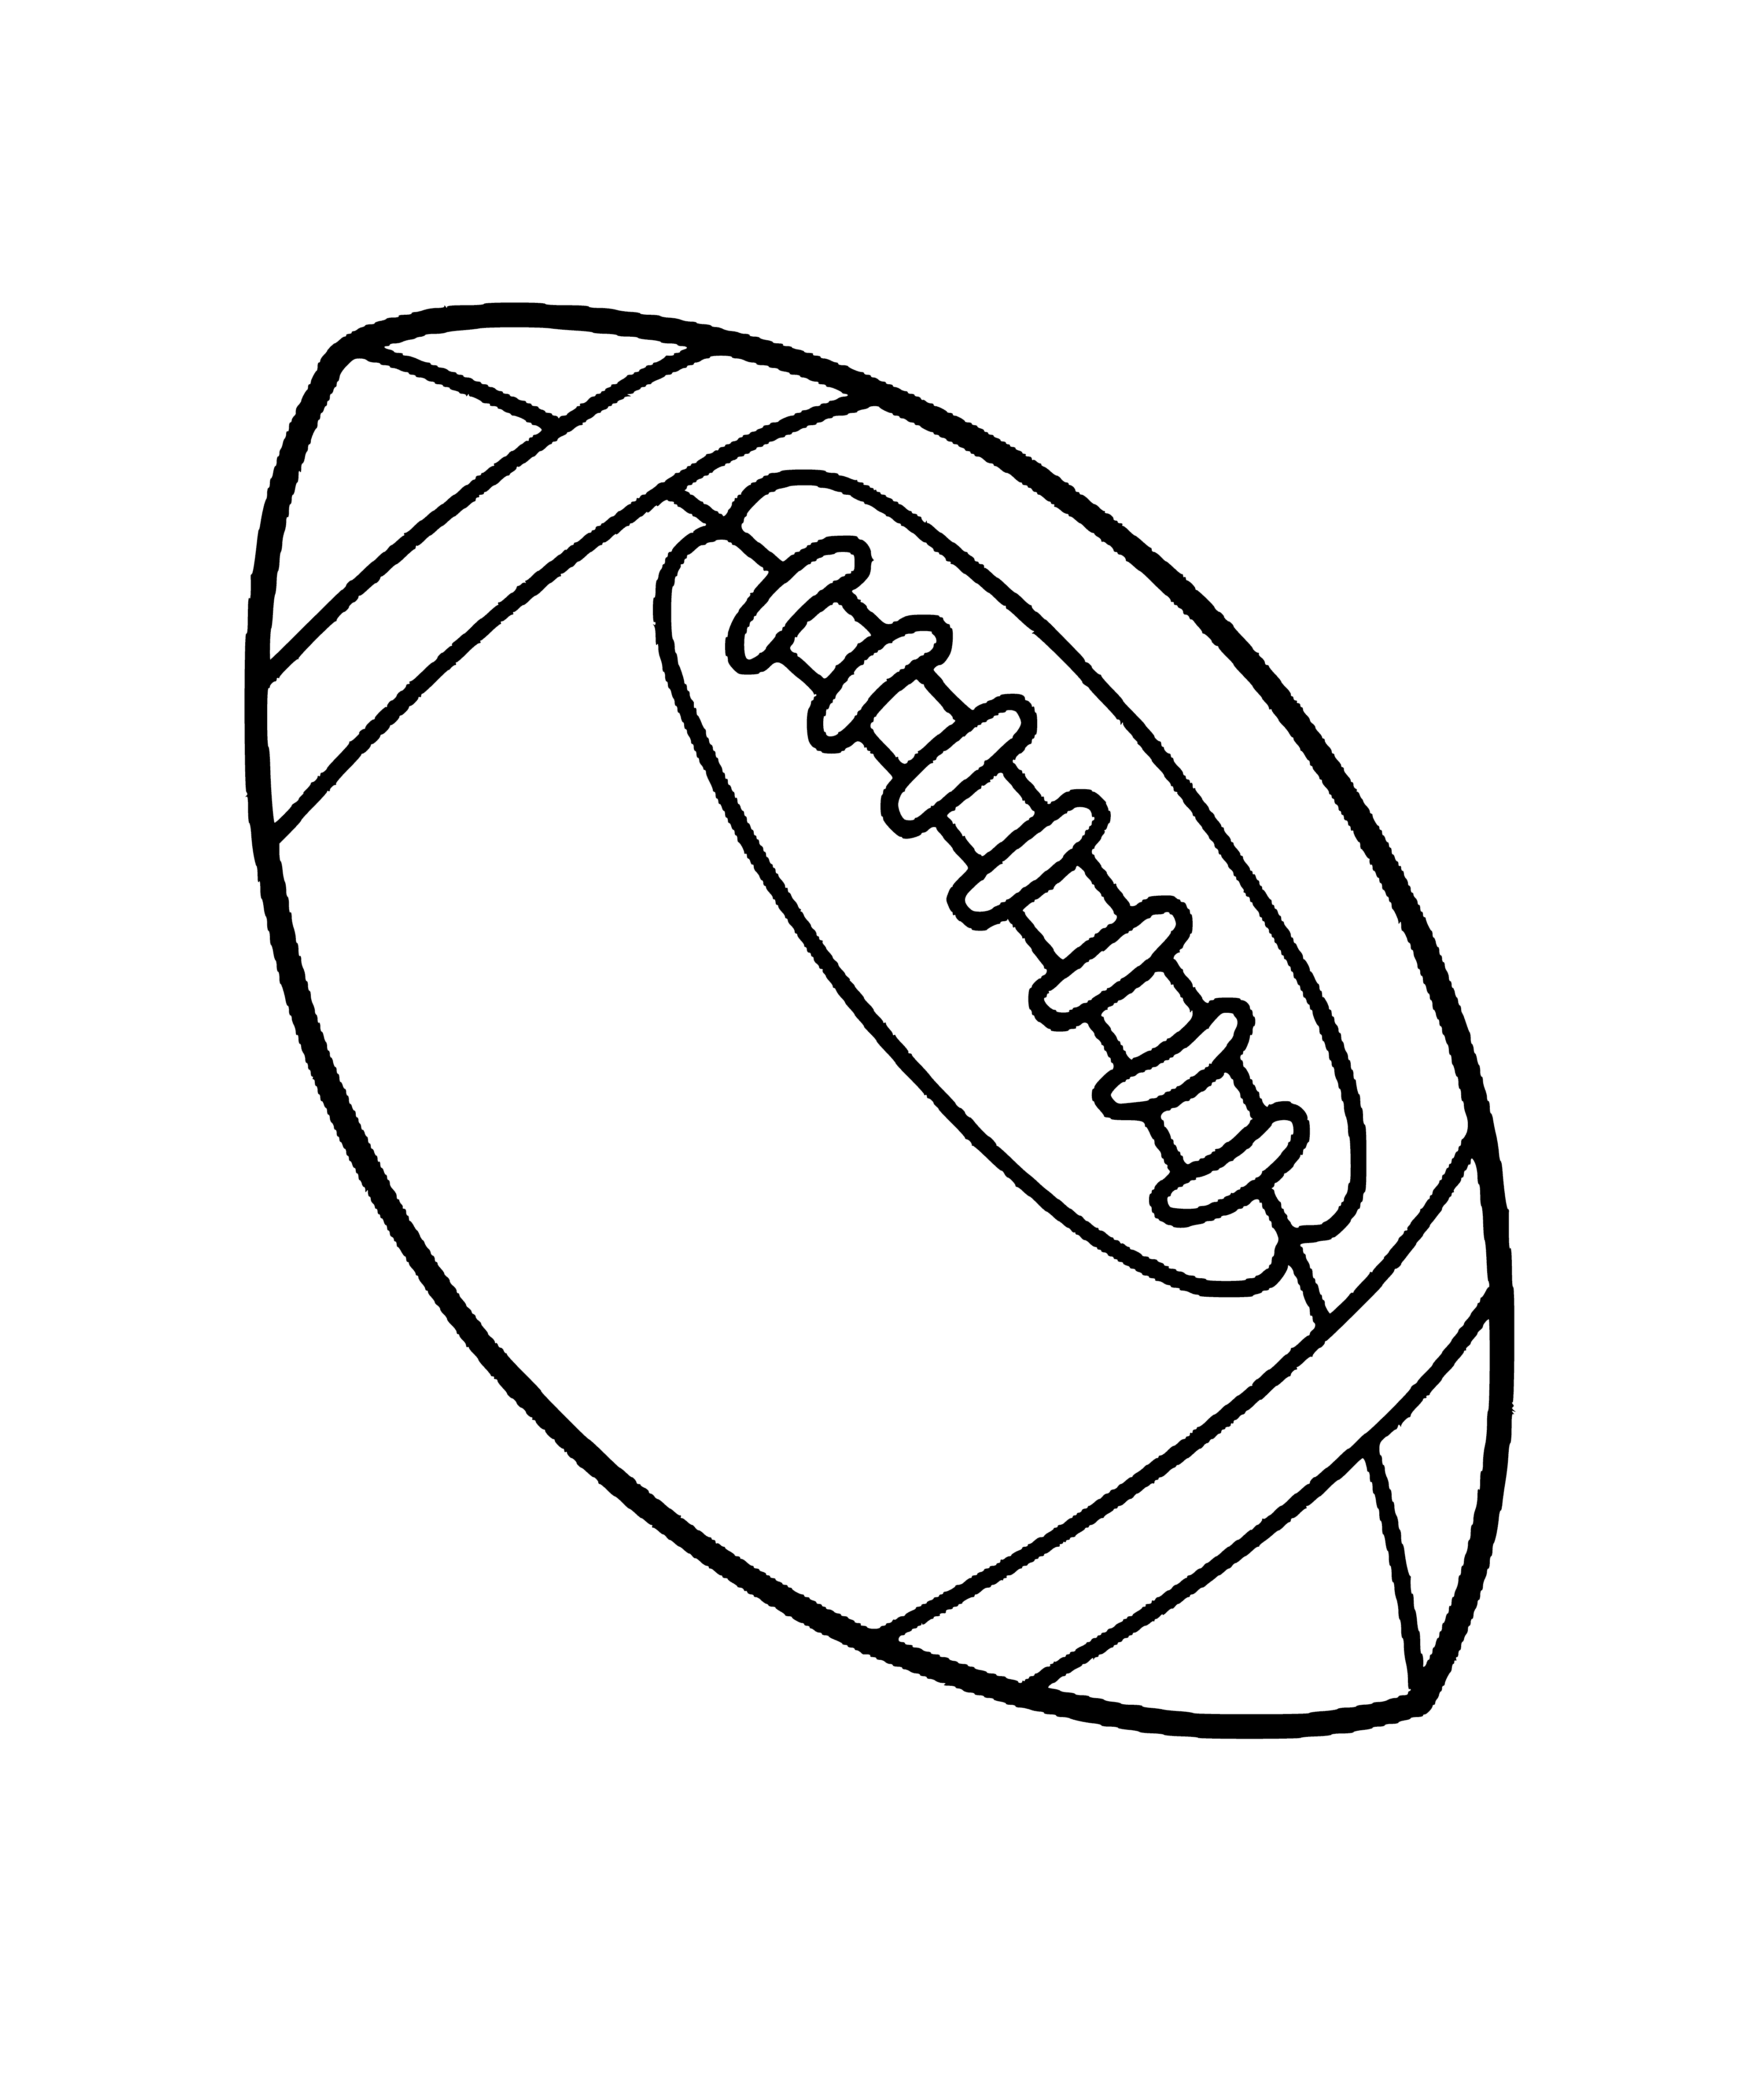 coloring page: A rugby ball is oblong-shaped and made of leather and cork, used in rugby union.